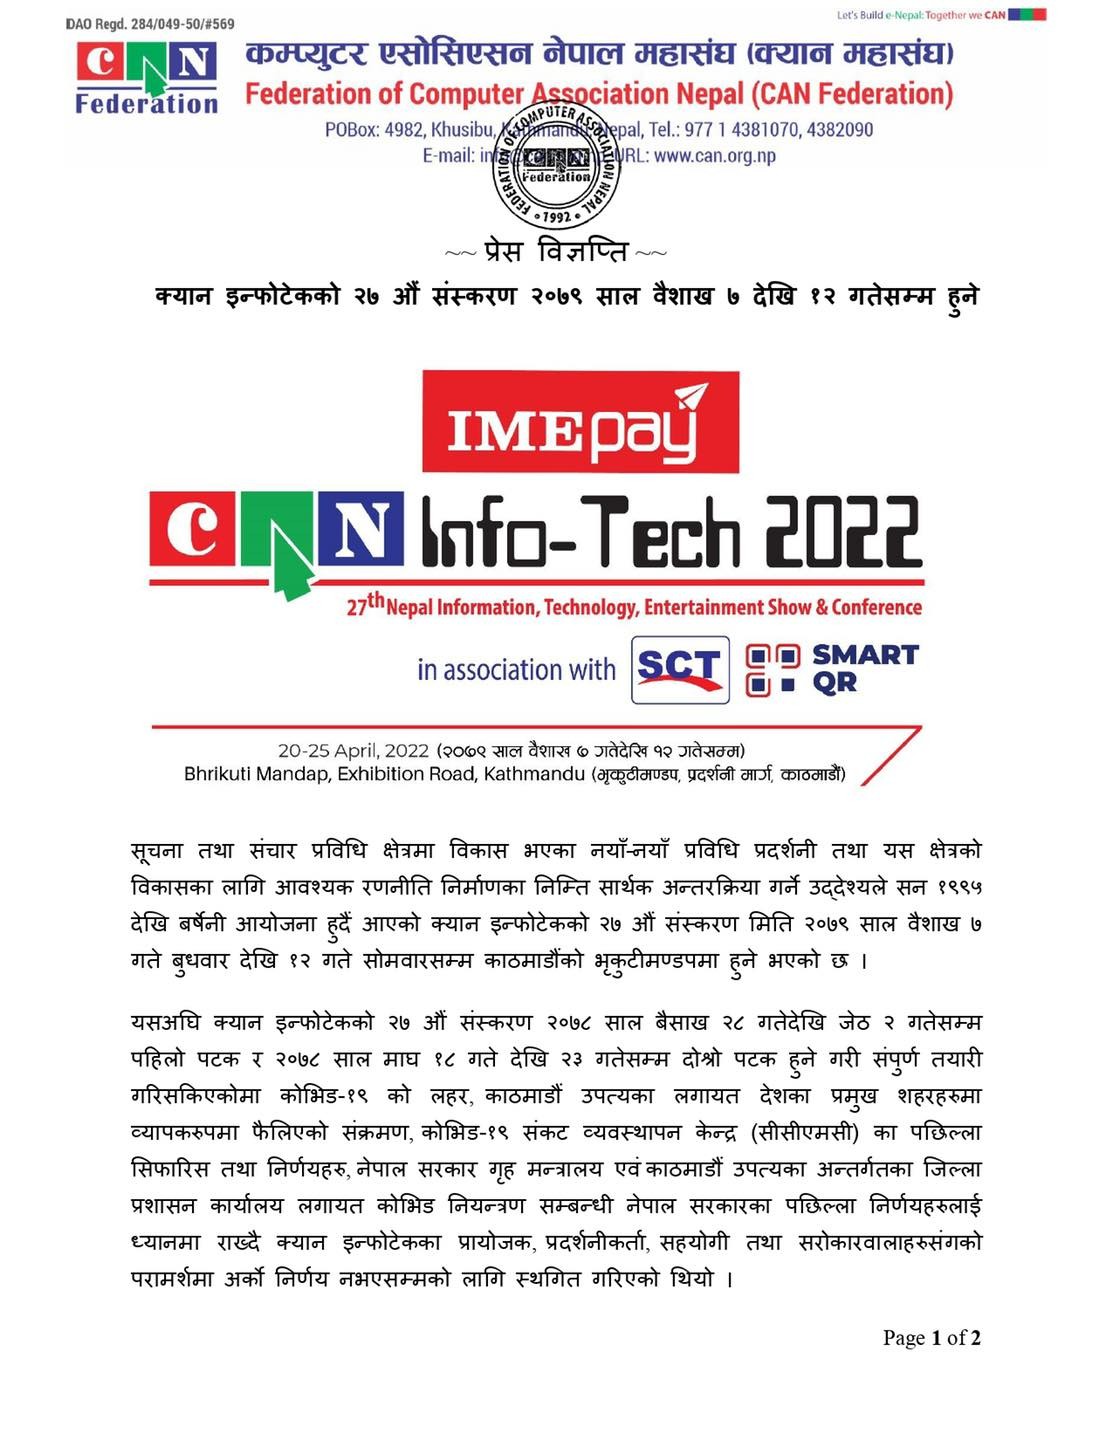 27th CAN Infotech from 20th April 2022